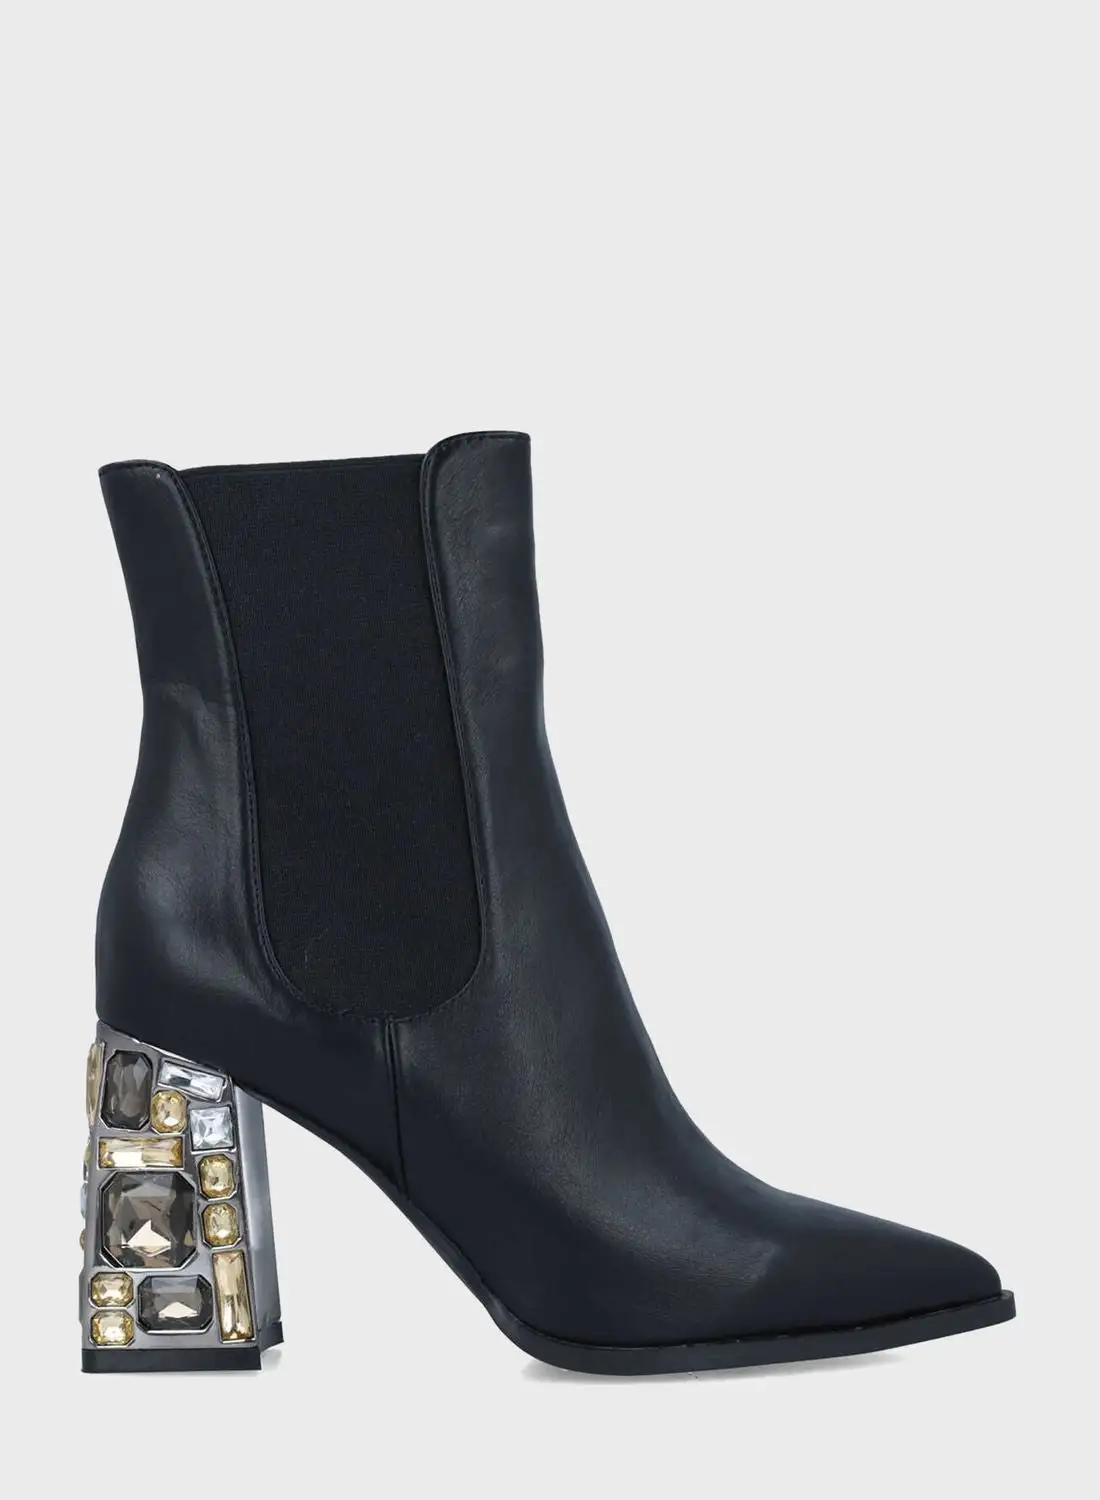 MENBUR Pointed Toe Boots